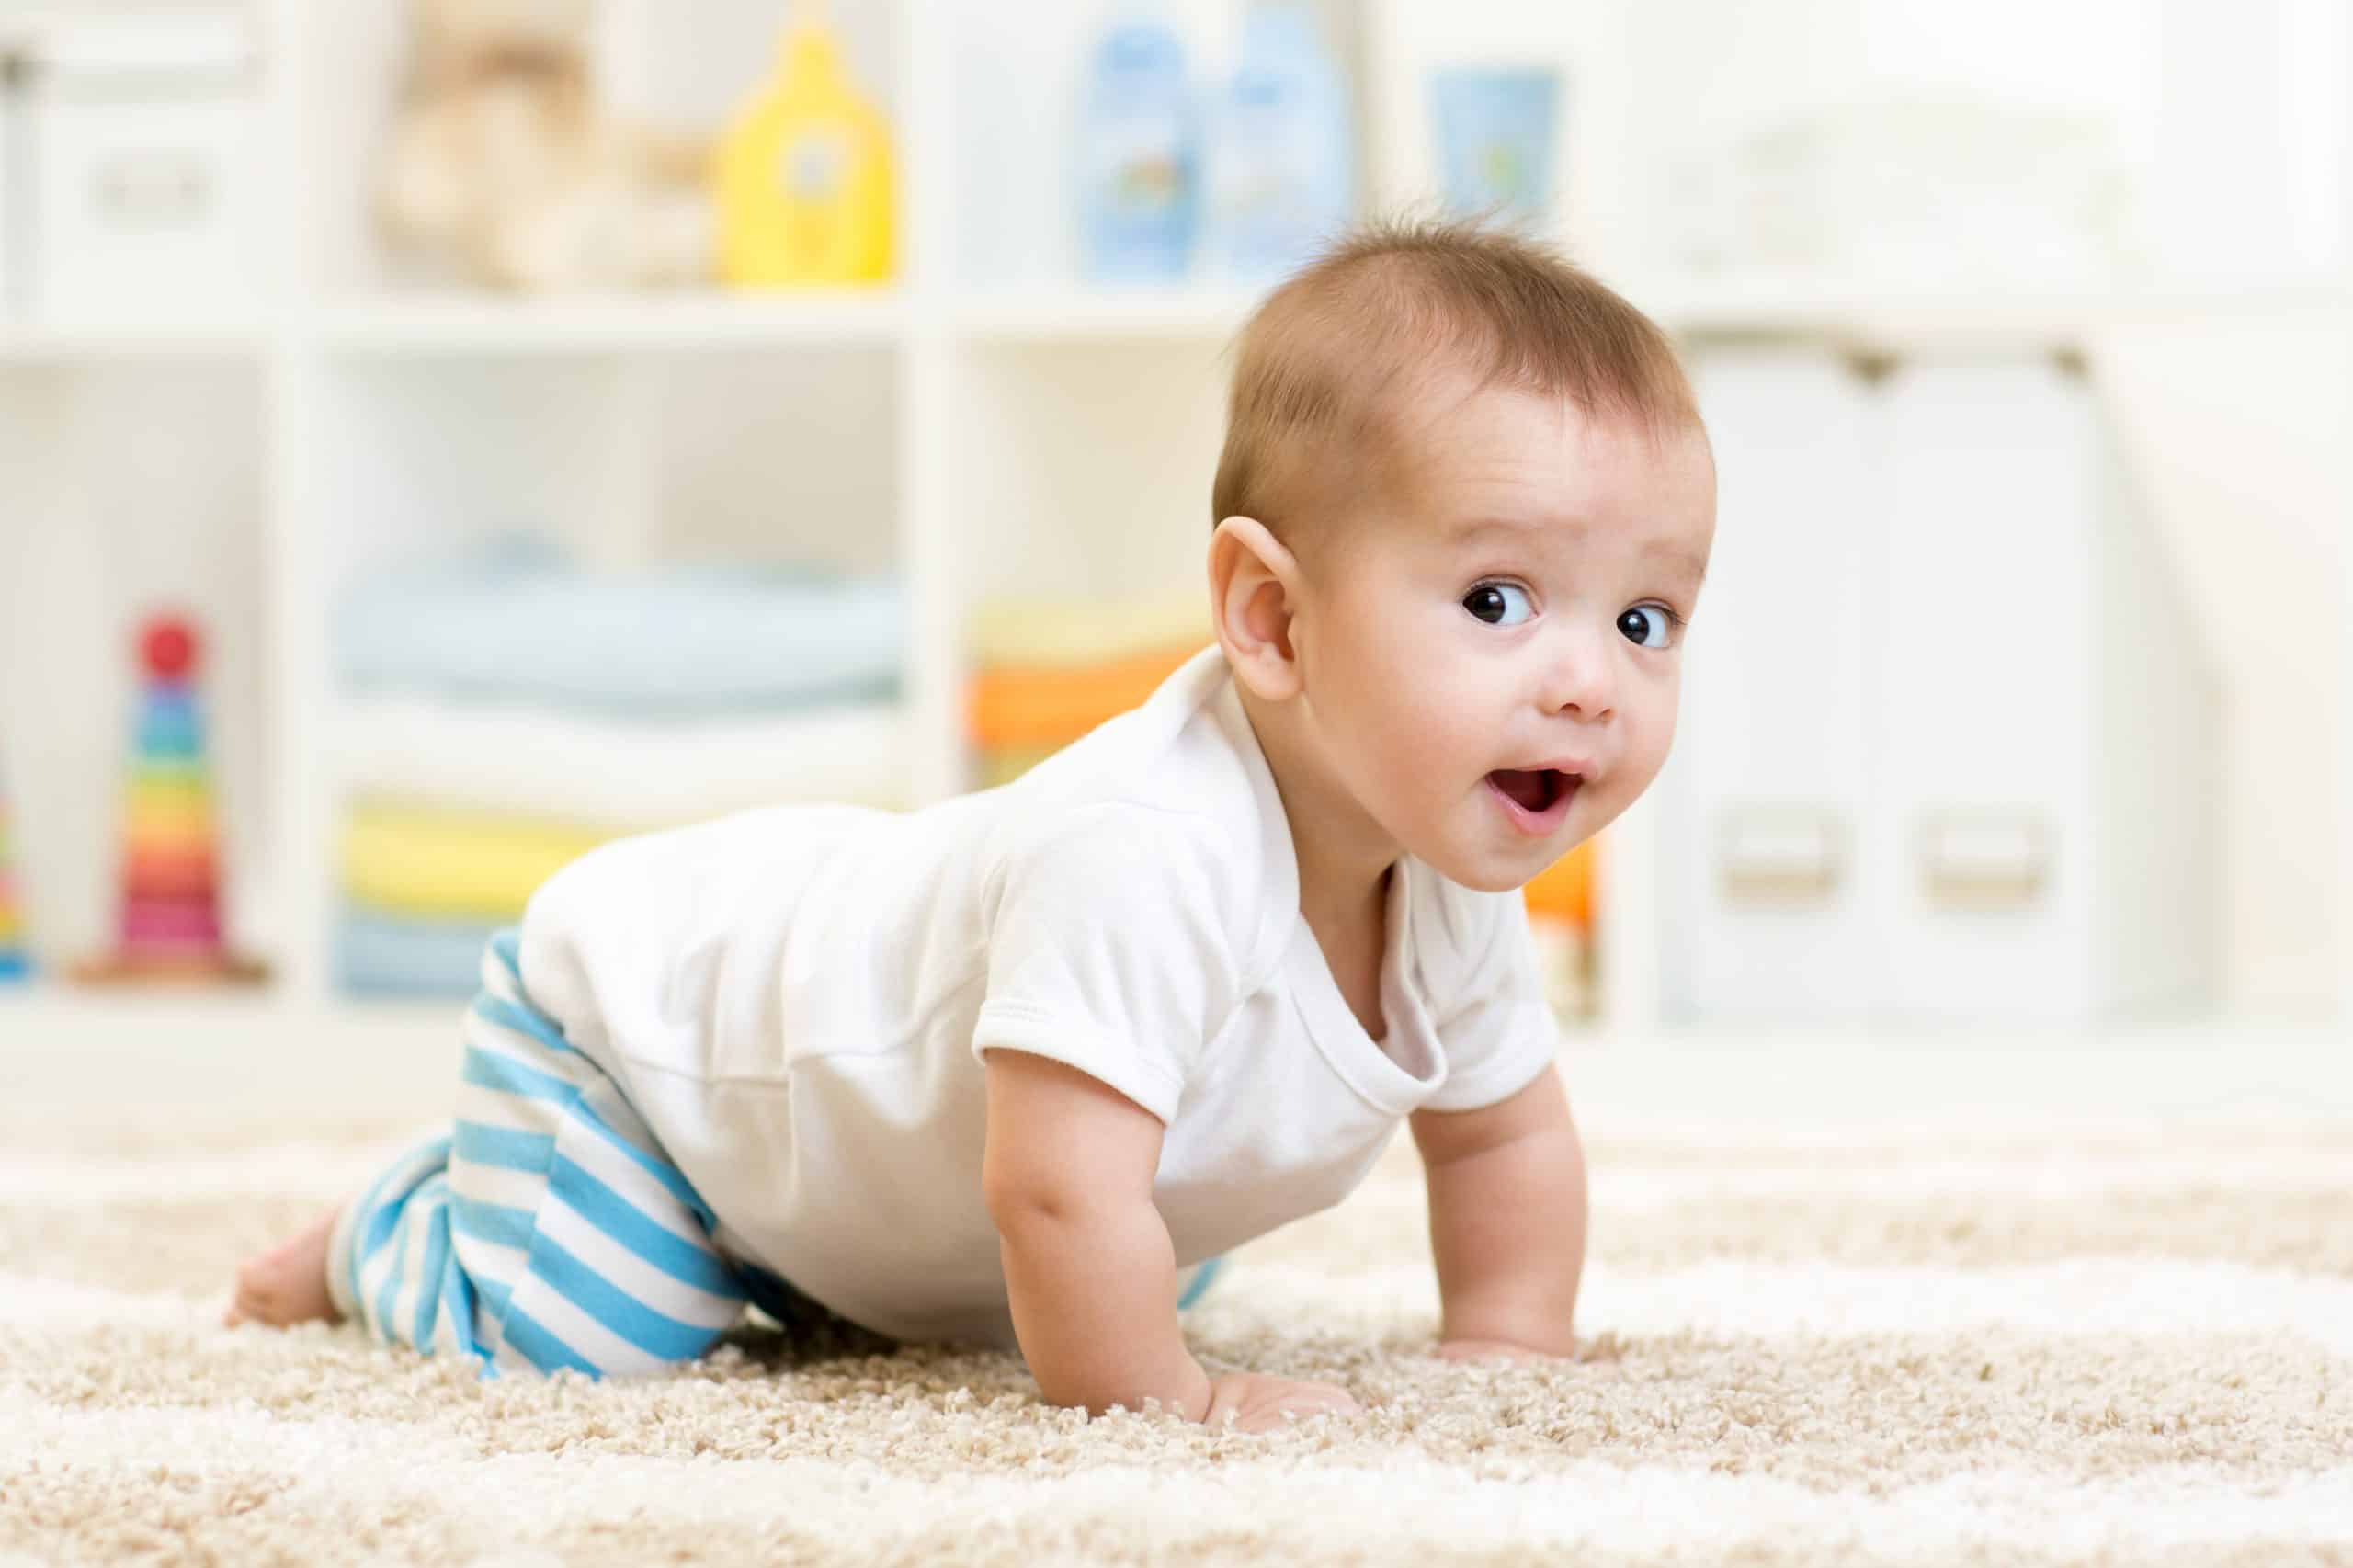 Baby crawling on a carpeted floor